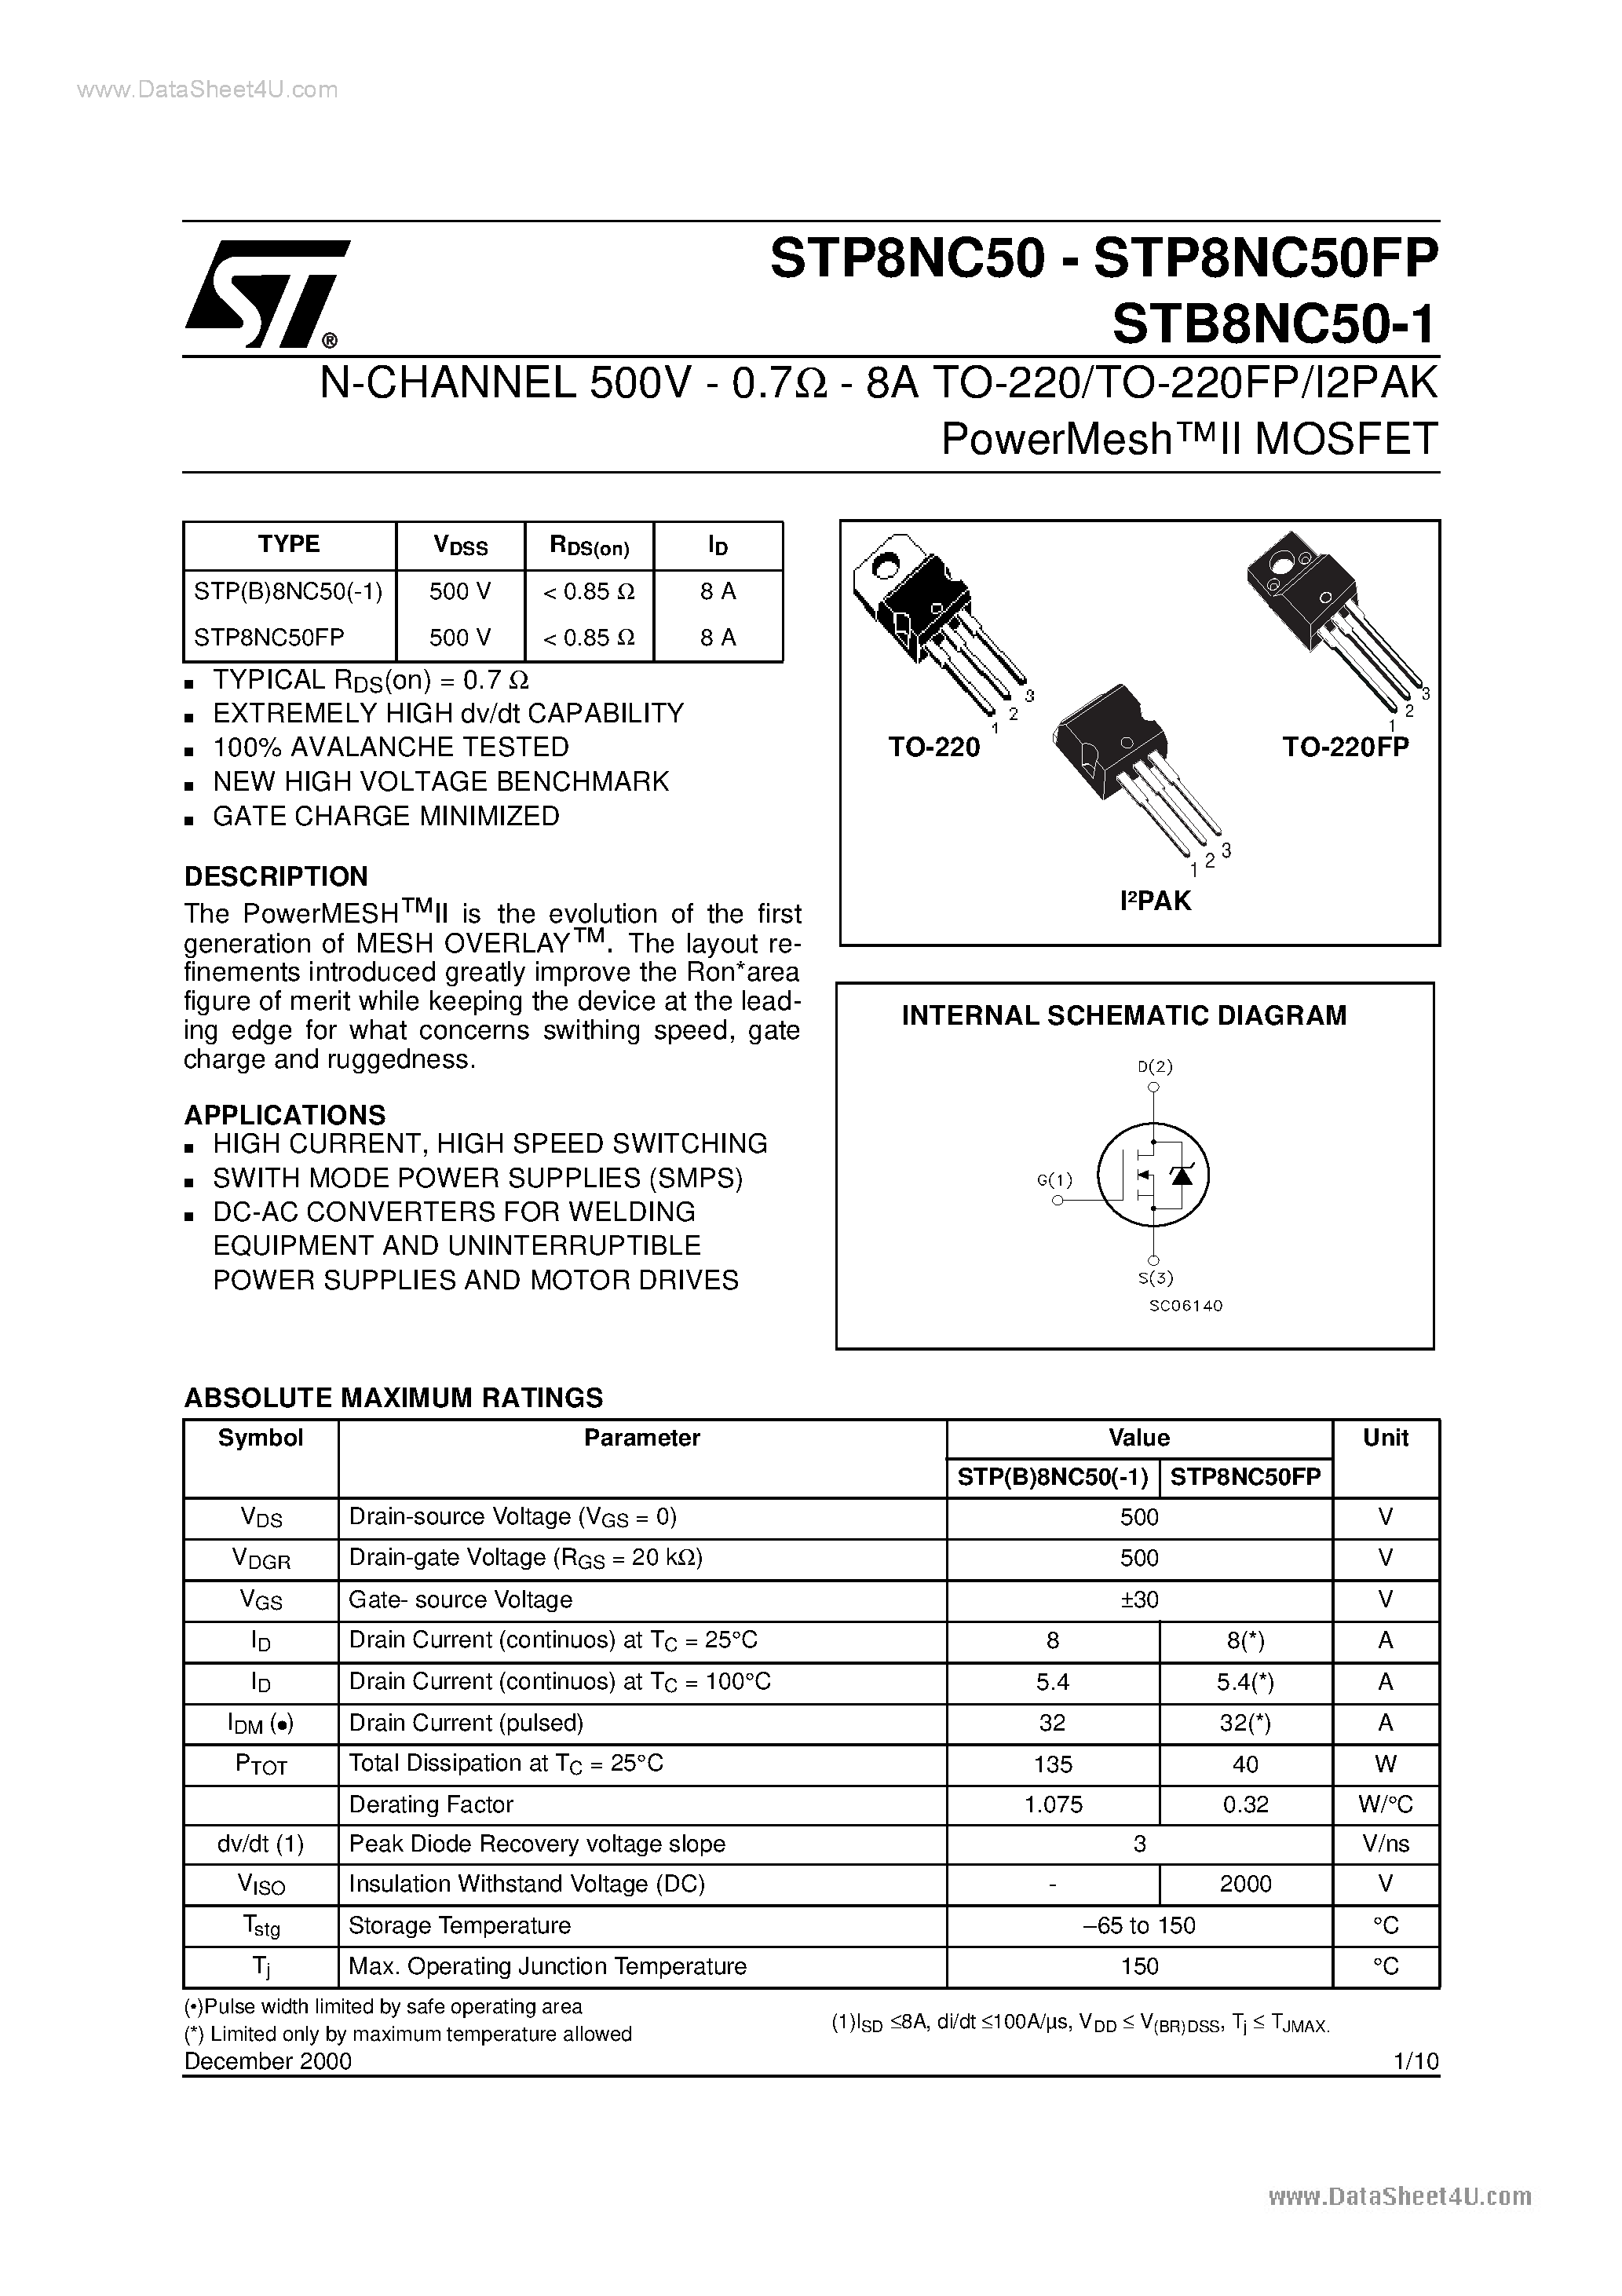 Datasheet P8NC50FP - Search -----> STP8NC50FP page 1